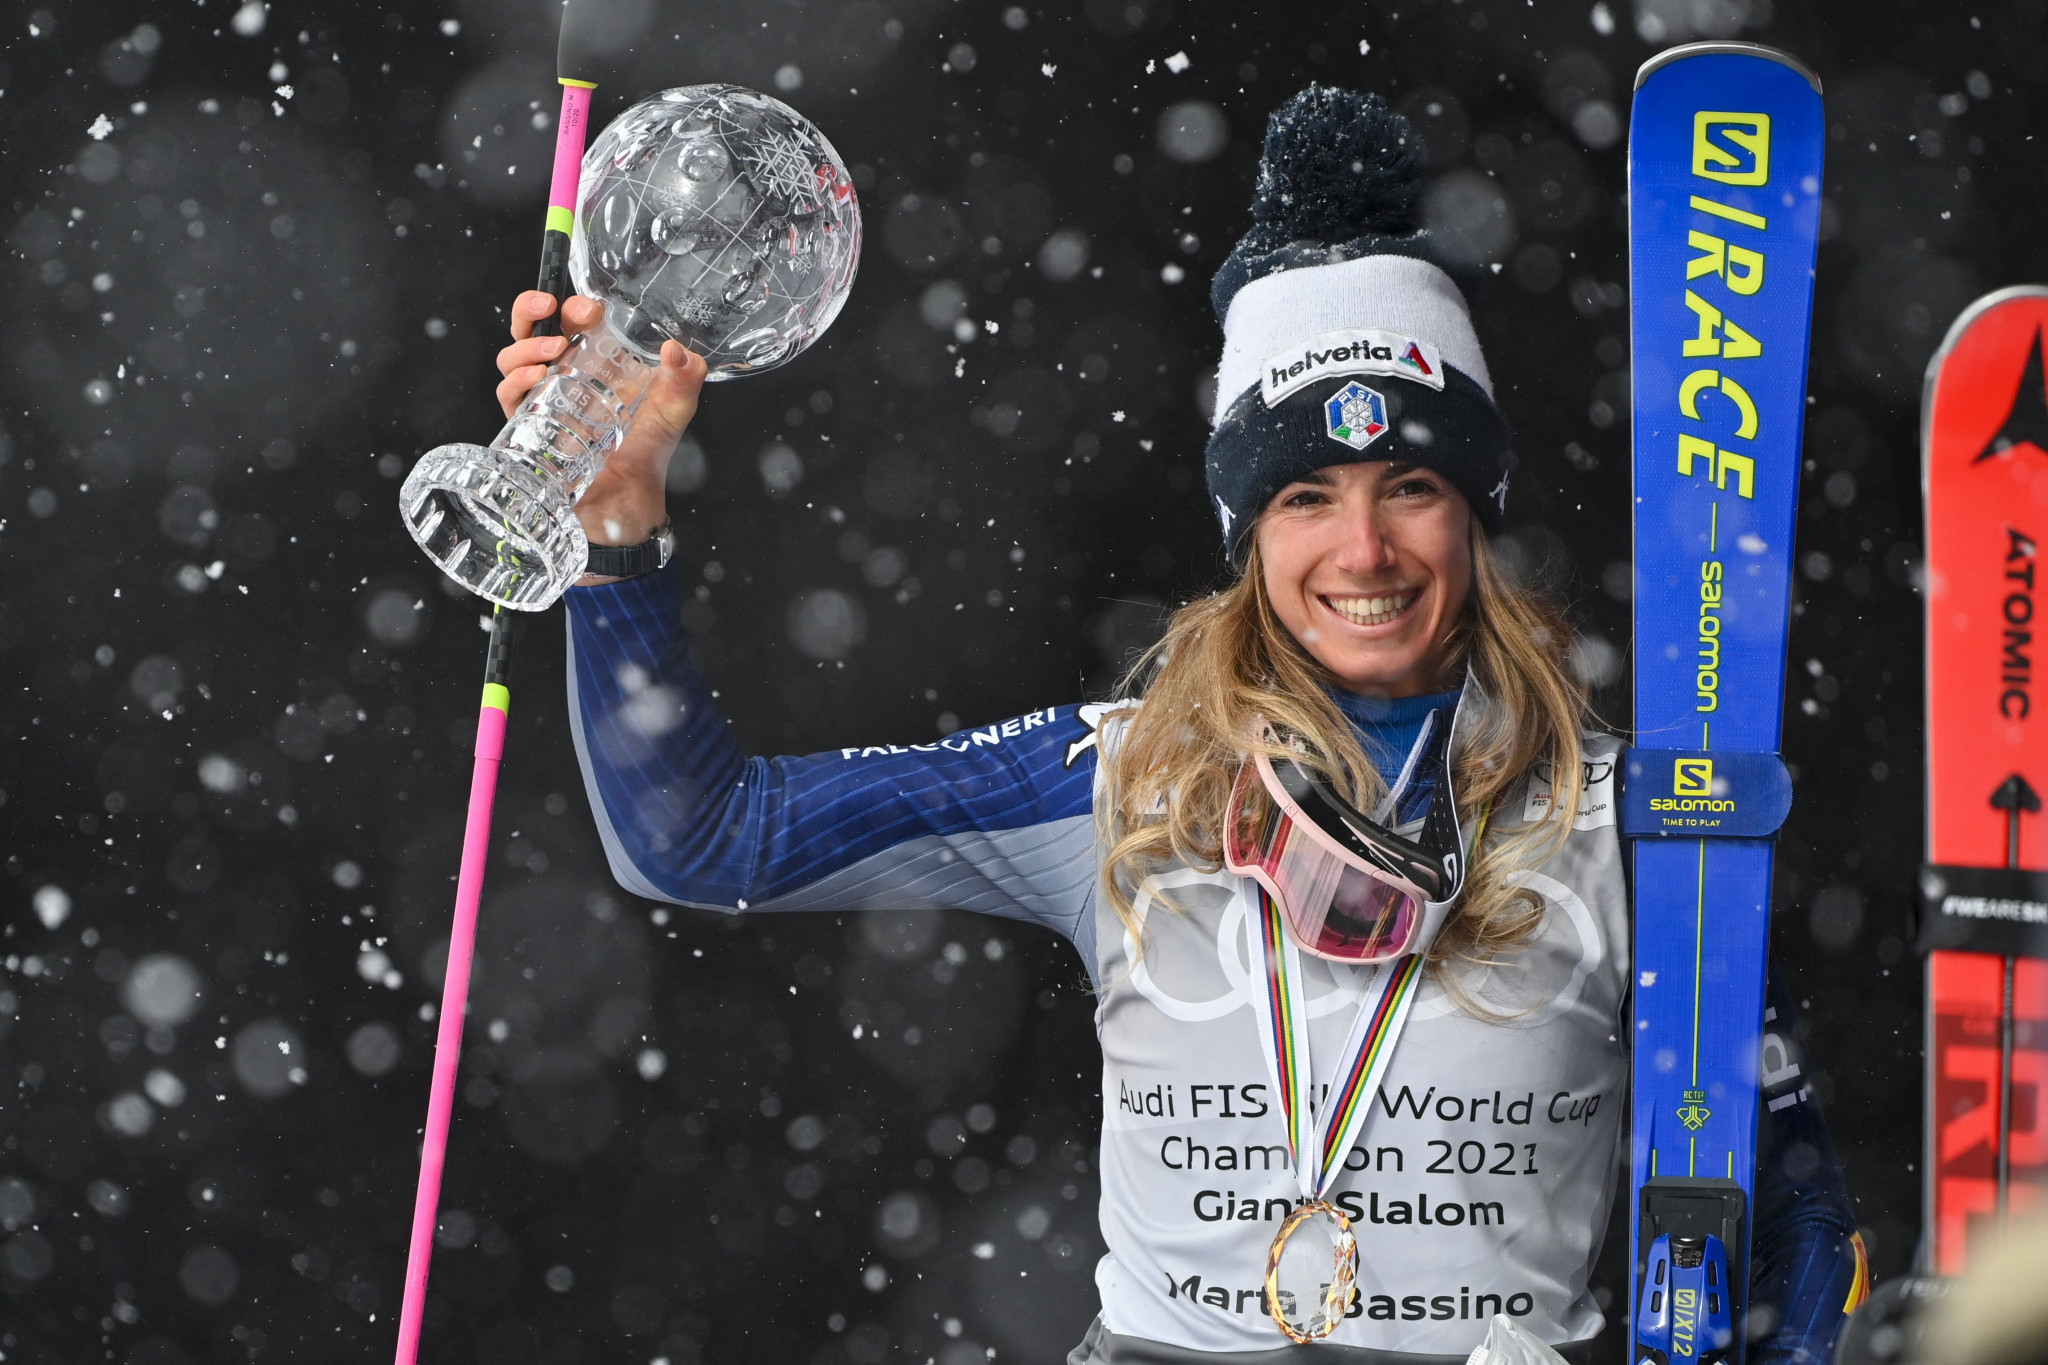 Marta Bassino won the Alpine Skiing World Cup giant slalom crystal globe in 2020-2021 ©Getty Images